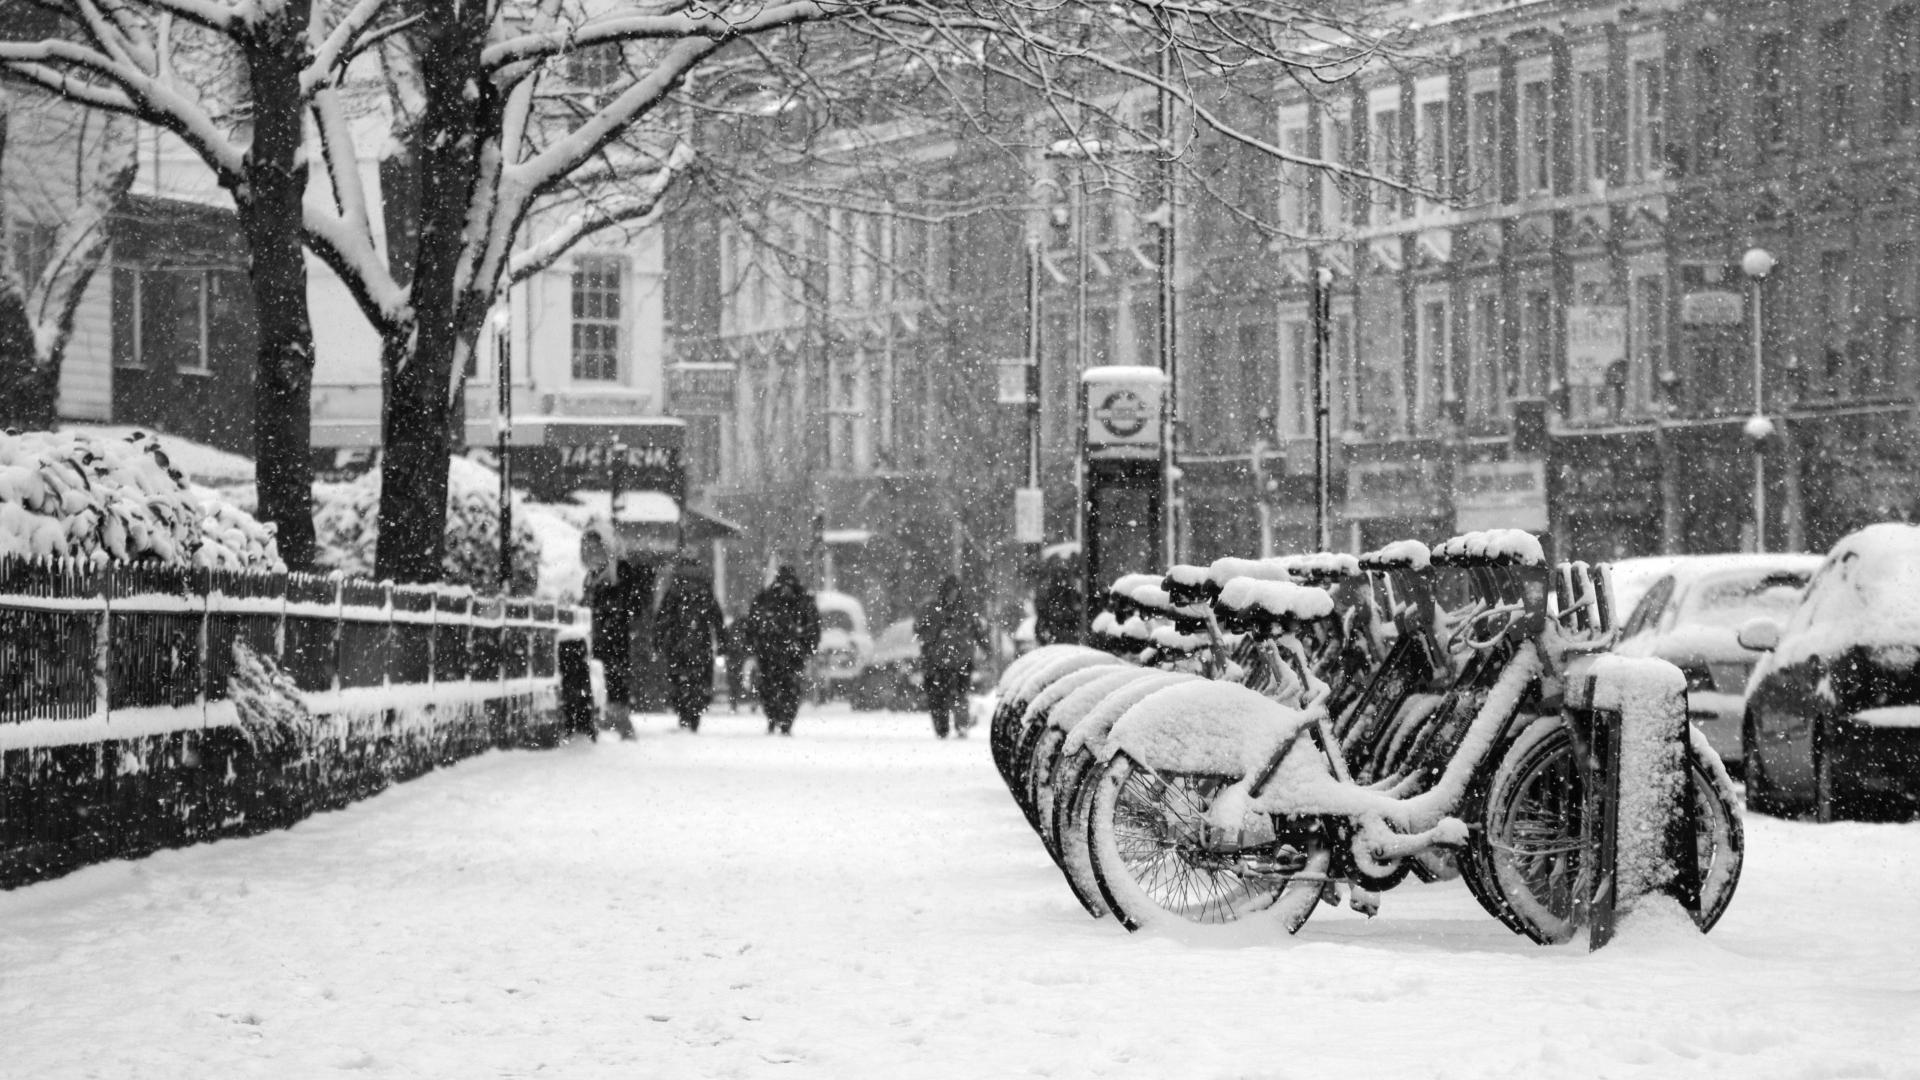 A london street blanketed in snow